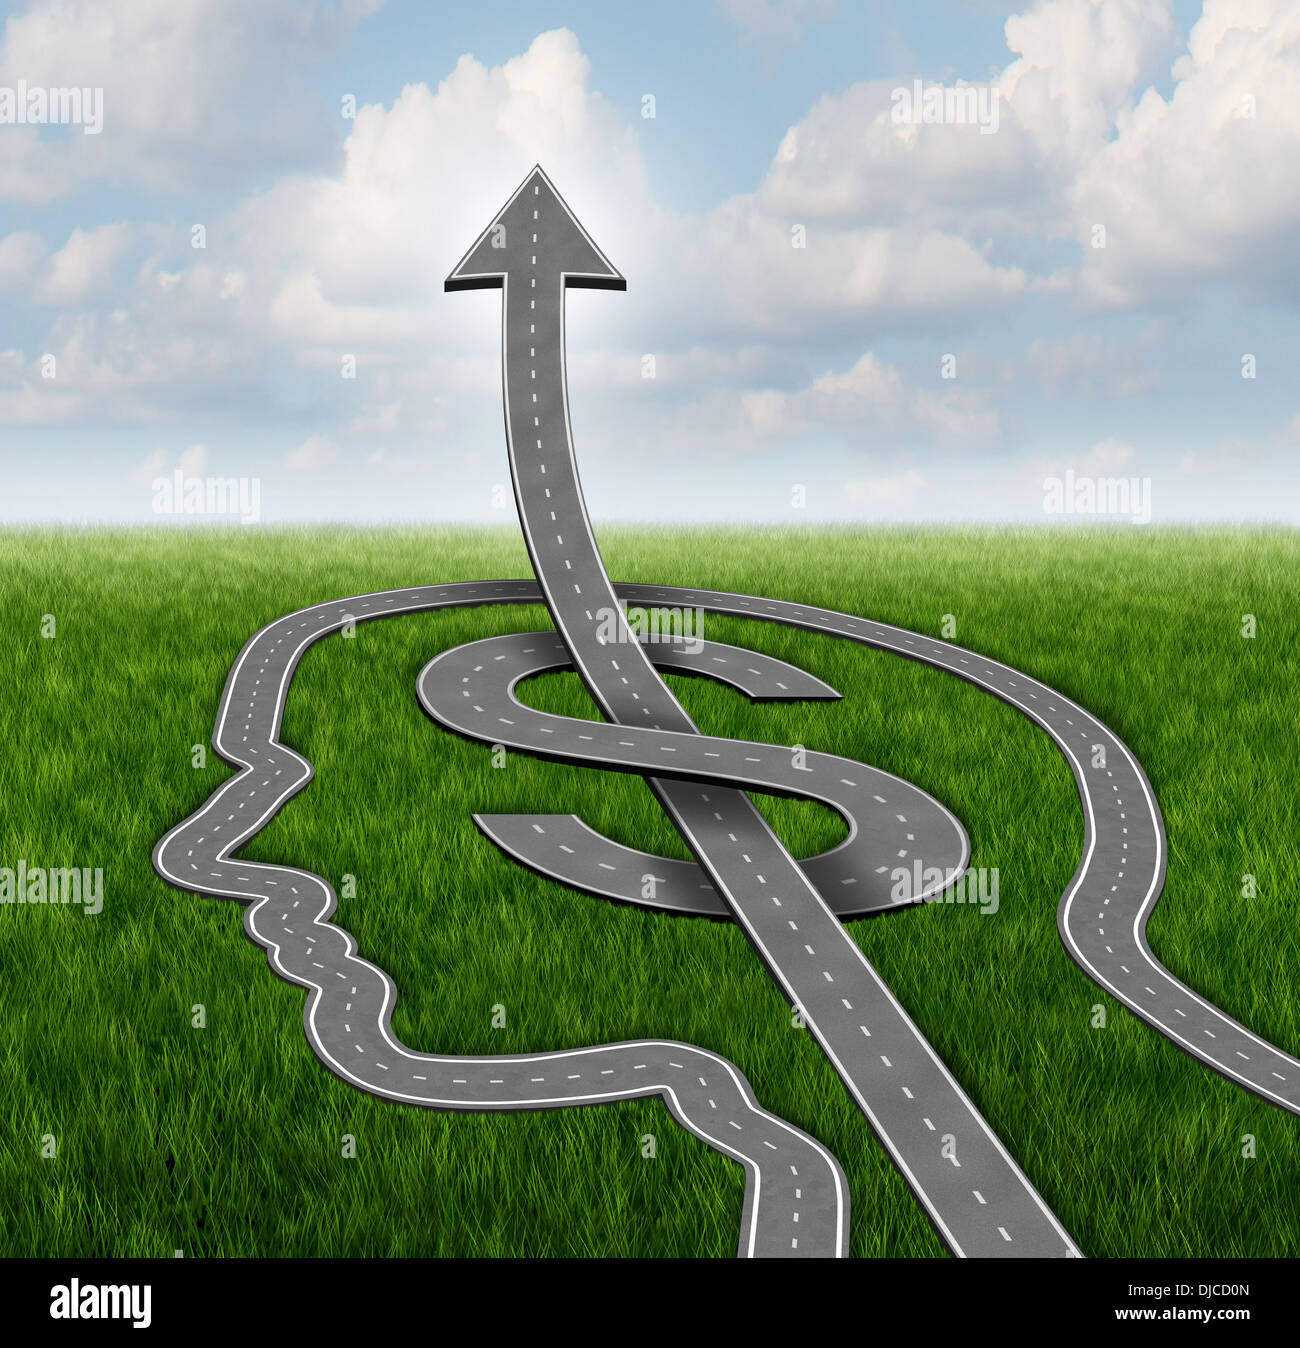 Financial growth path business concept with a group of roads or streets shaped as a human head and a dollar symbol with an arrow pointing up as a metaphor for investing strategy and planning success. Stock Photo